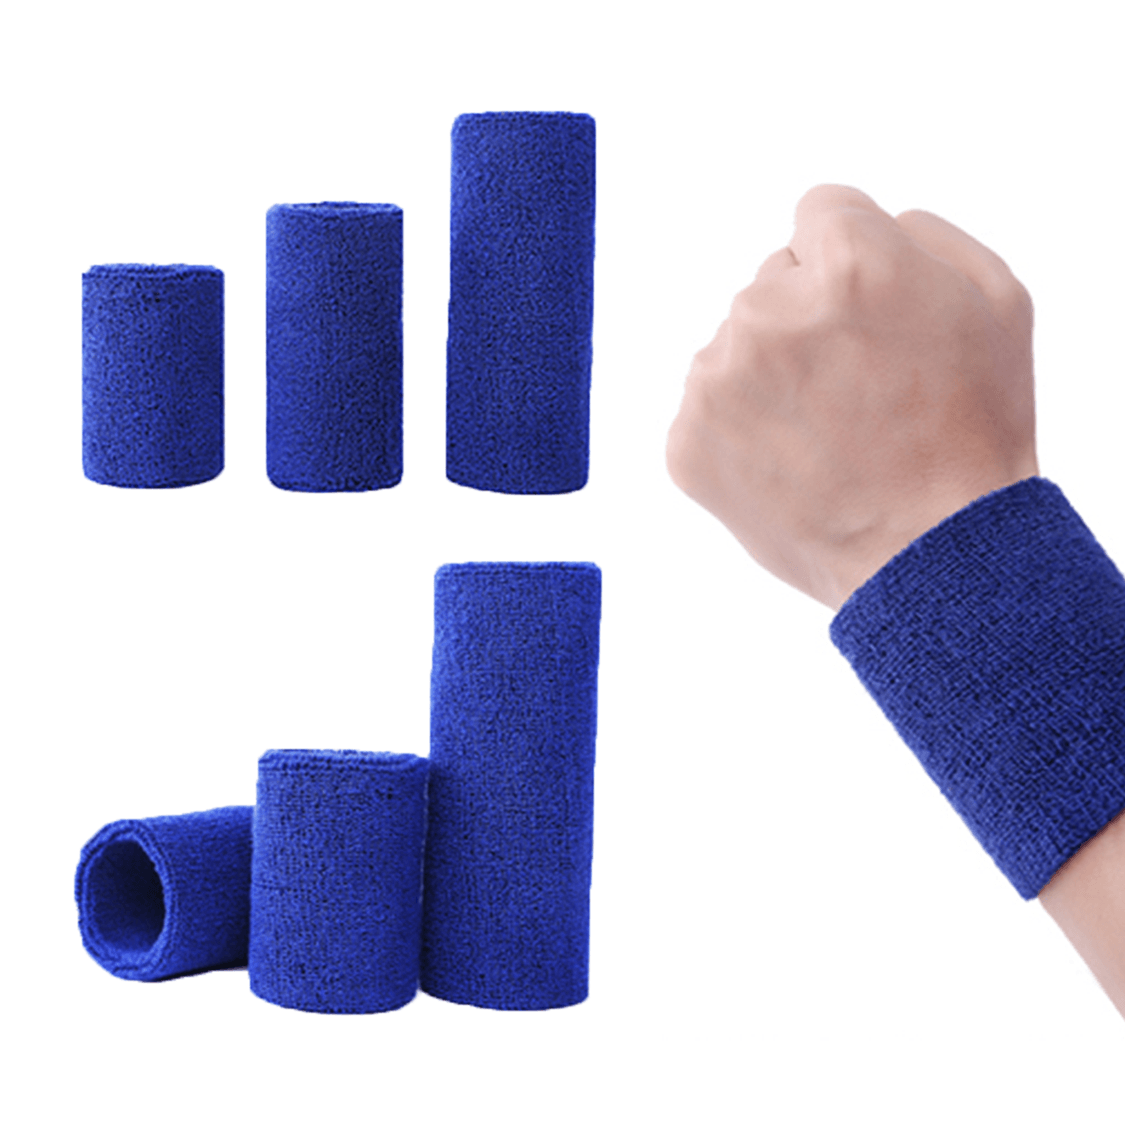 Wrist Sweatband in 10 Different Colors,Made by High Elastic Meterial Comfortable Pressure Protection,Athletic Wristbands Armbands CM6P0019 - applecome